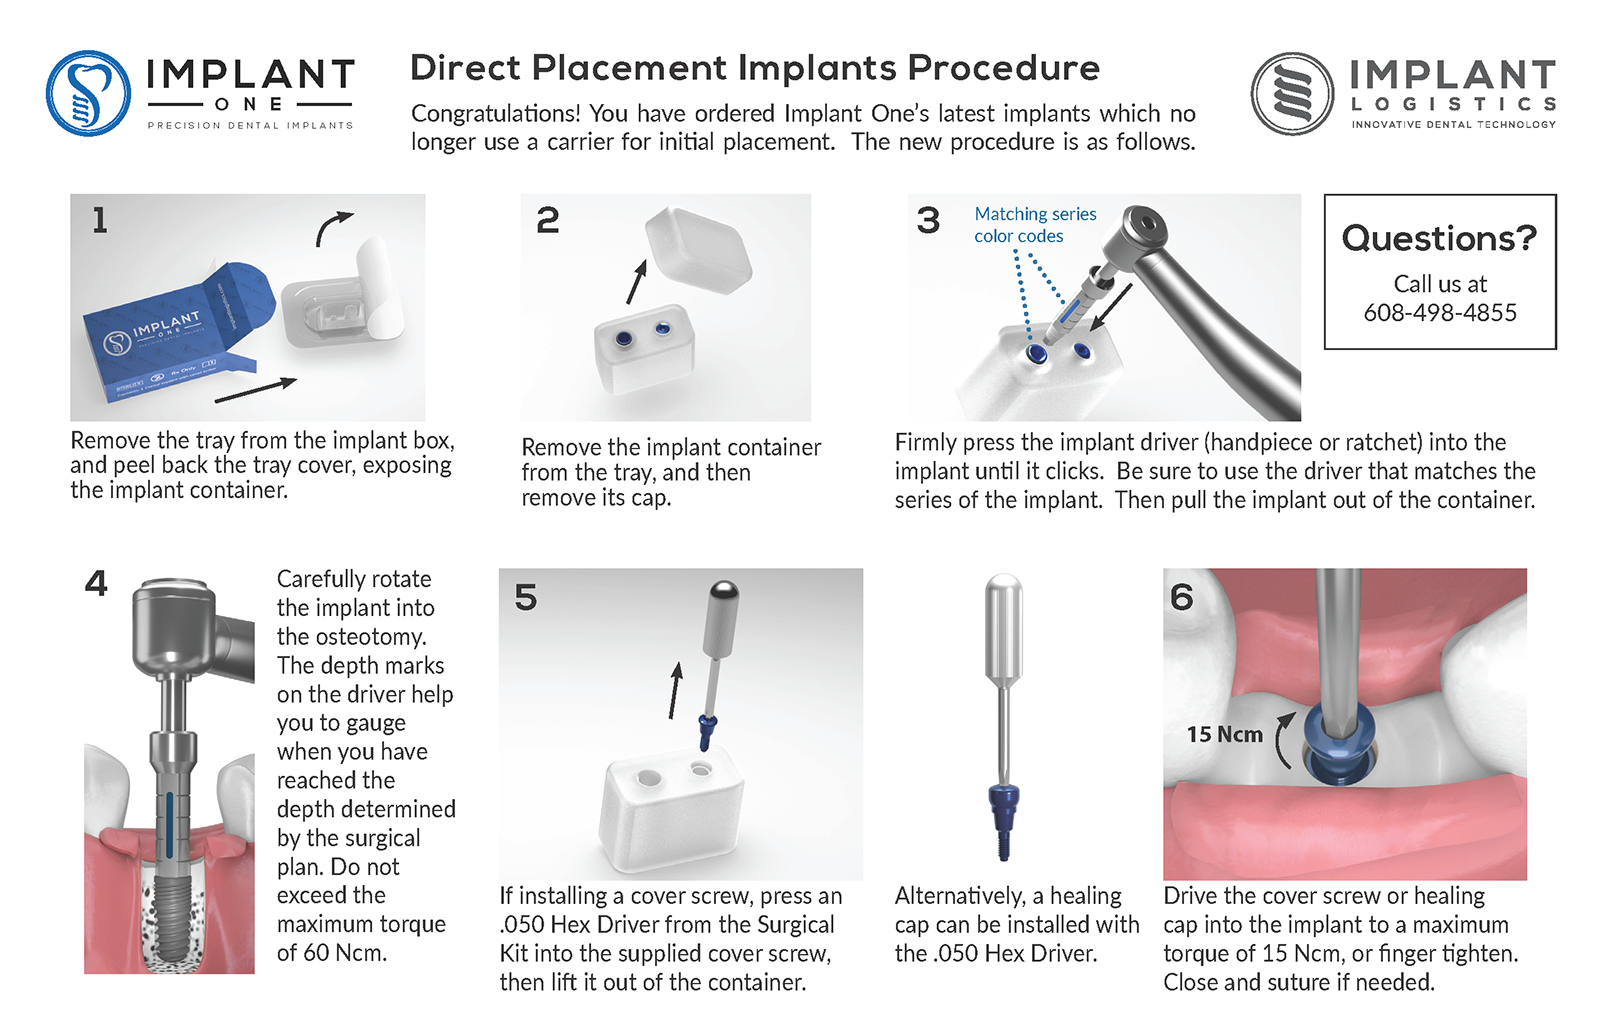 Implant One Direct Placement Implants Procedure Sheet